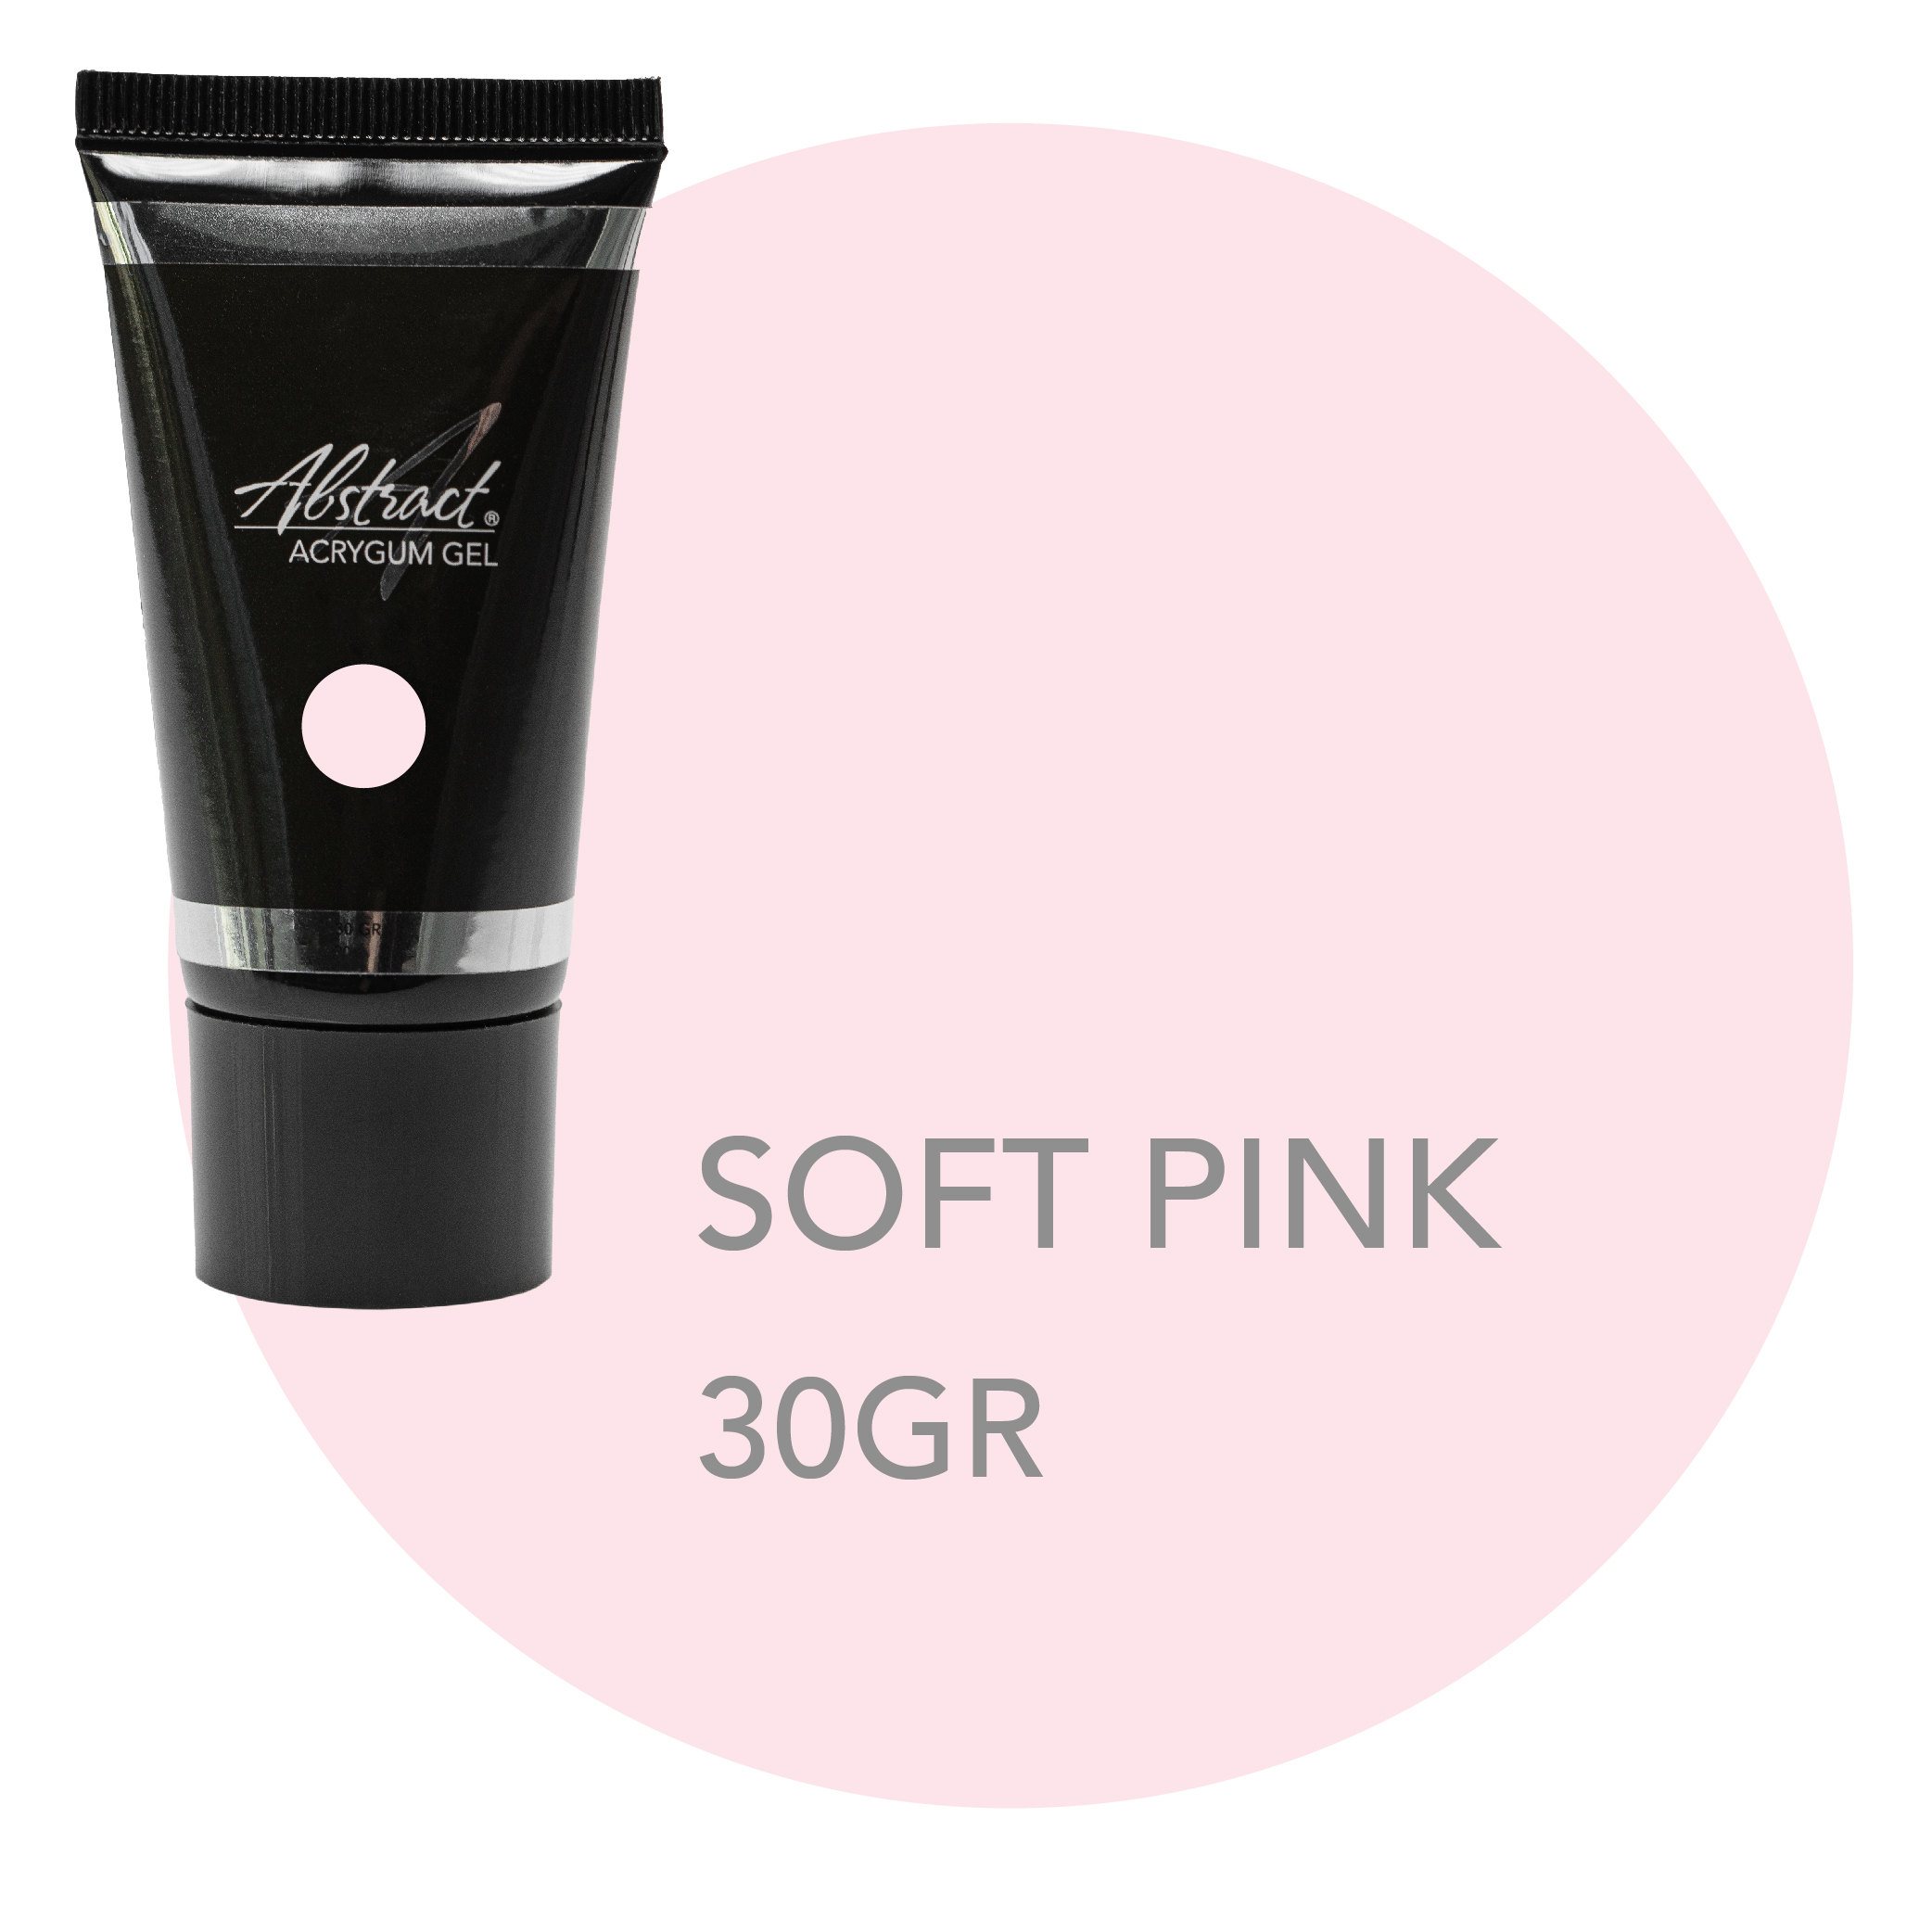 AcryGum SOFT PINK 30gr (tube), Abstract | 174339